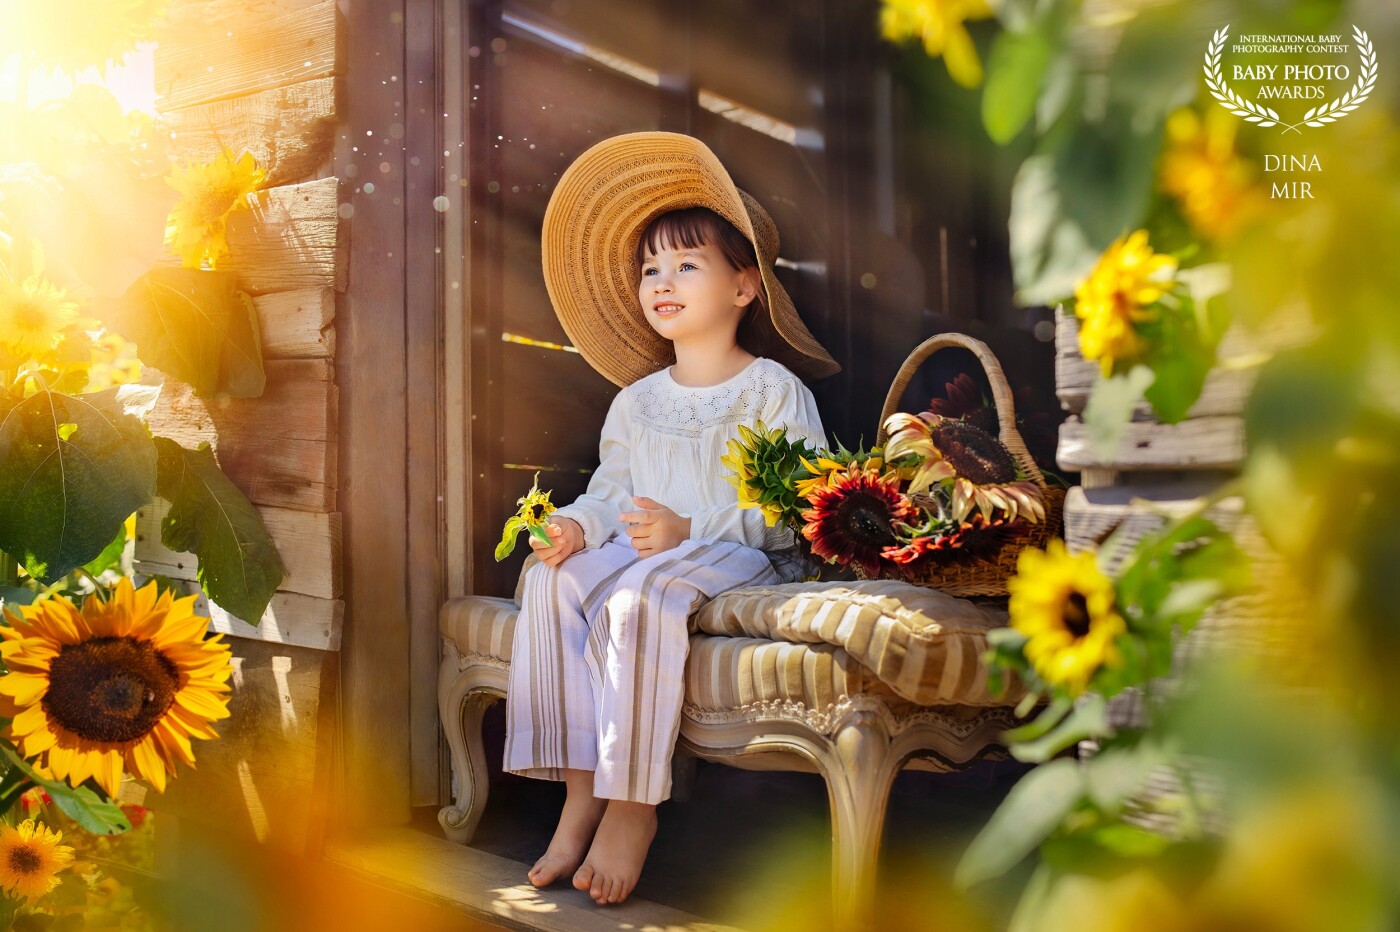 My young client at the sunflower farm. Look at her. She is like the sun. Bright and cheerful))) She looks at the flowers, mom, dad and enjoys a beautiful summer day)